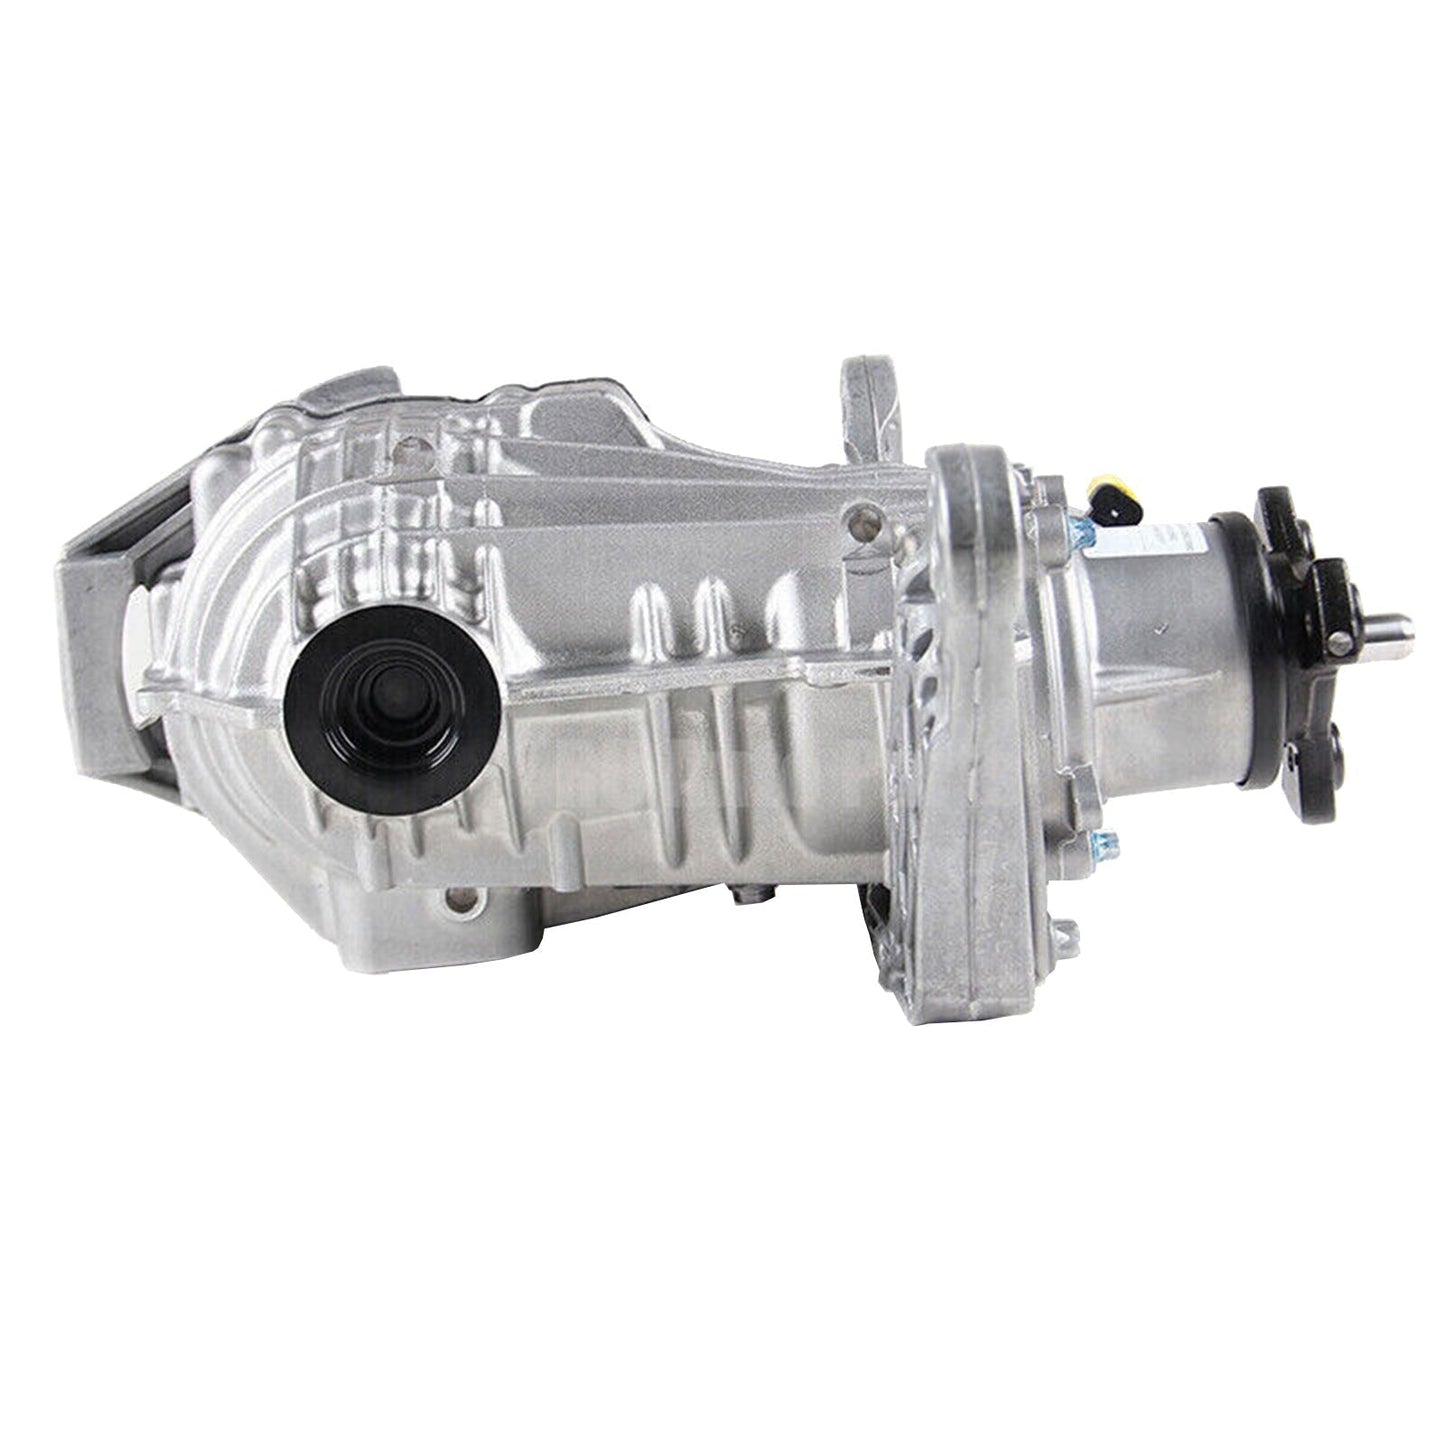 Mercedes Benz W117 CLA 220 4-MATIC Rear Differential Assembly A2463500802